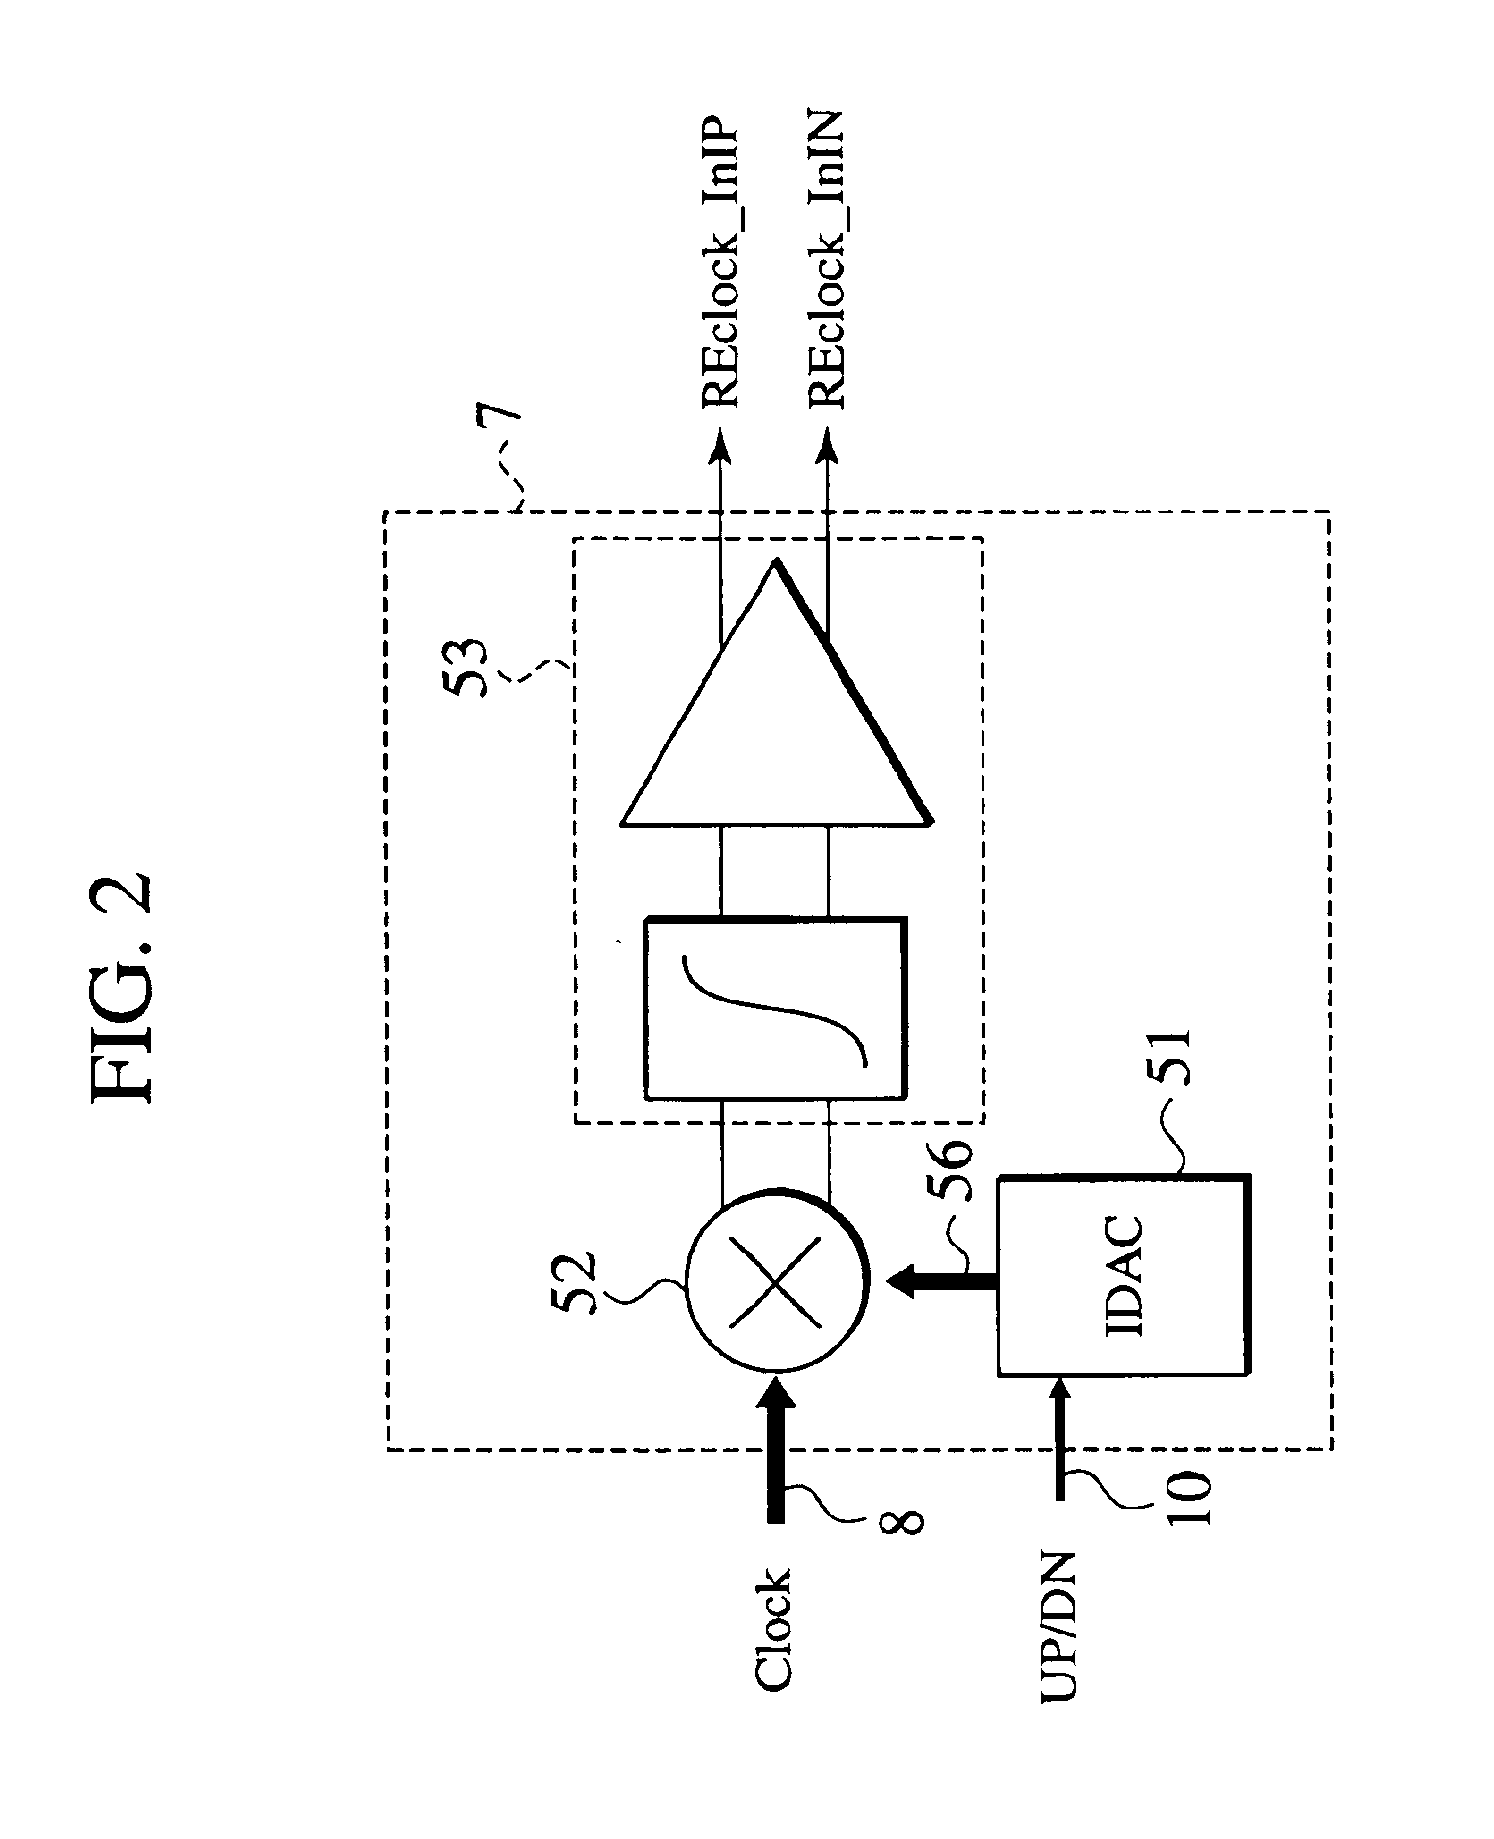 Phase interpolator and receiver for adjusting clock phases into data phases